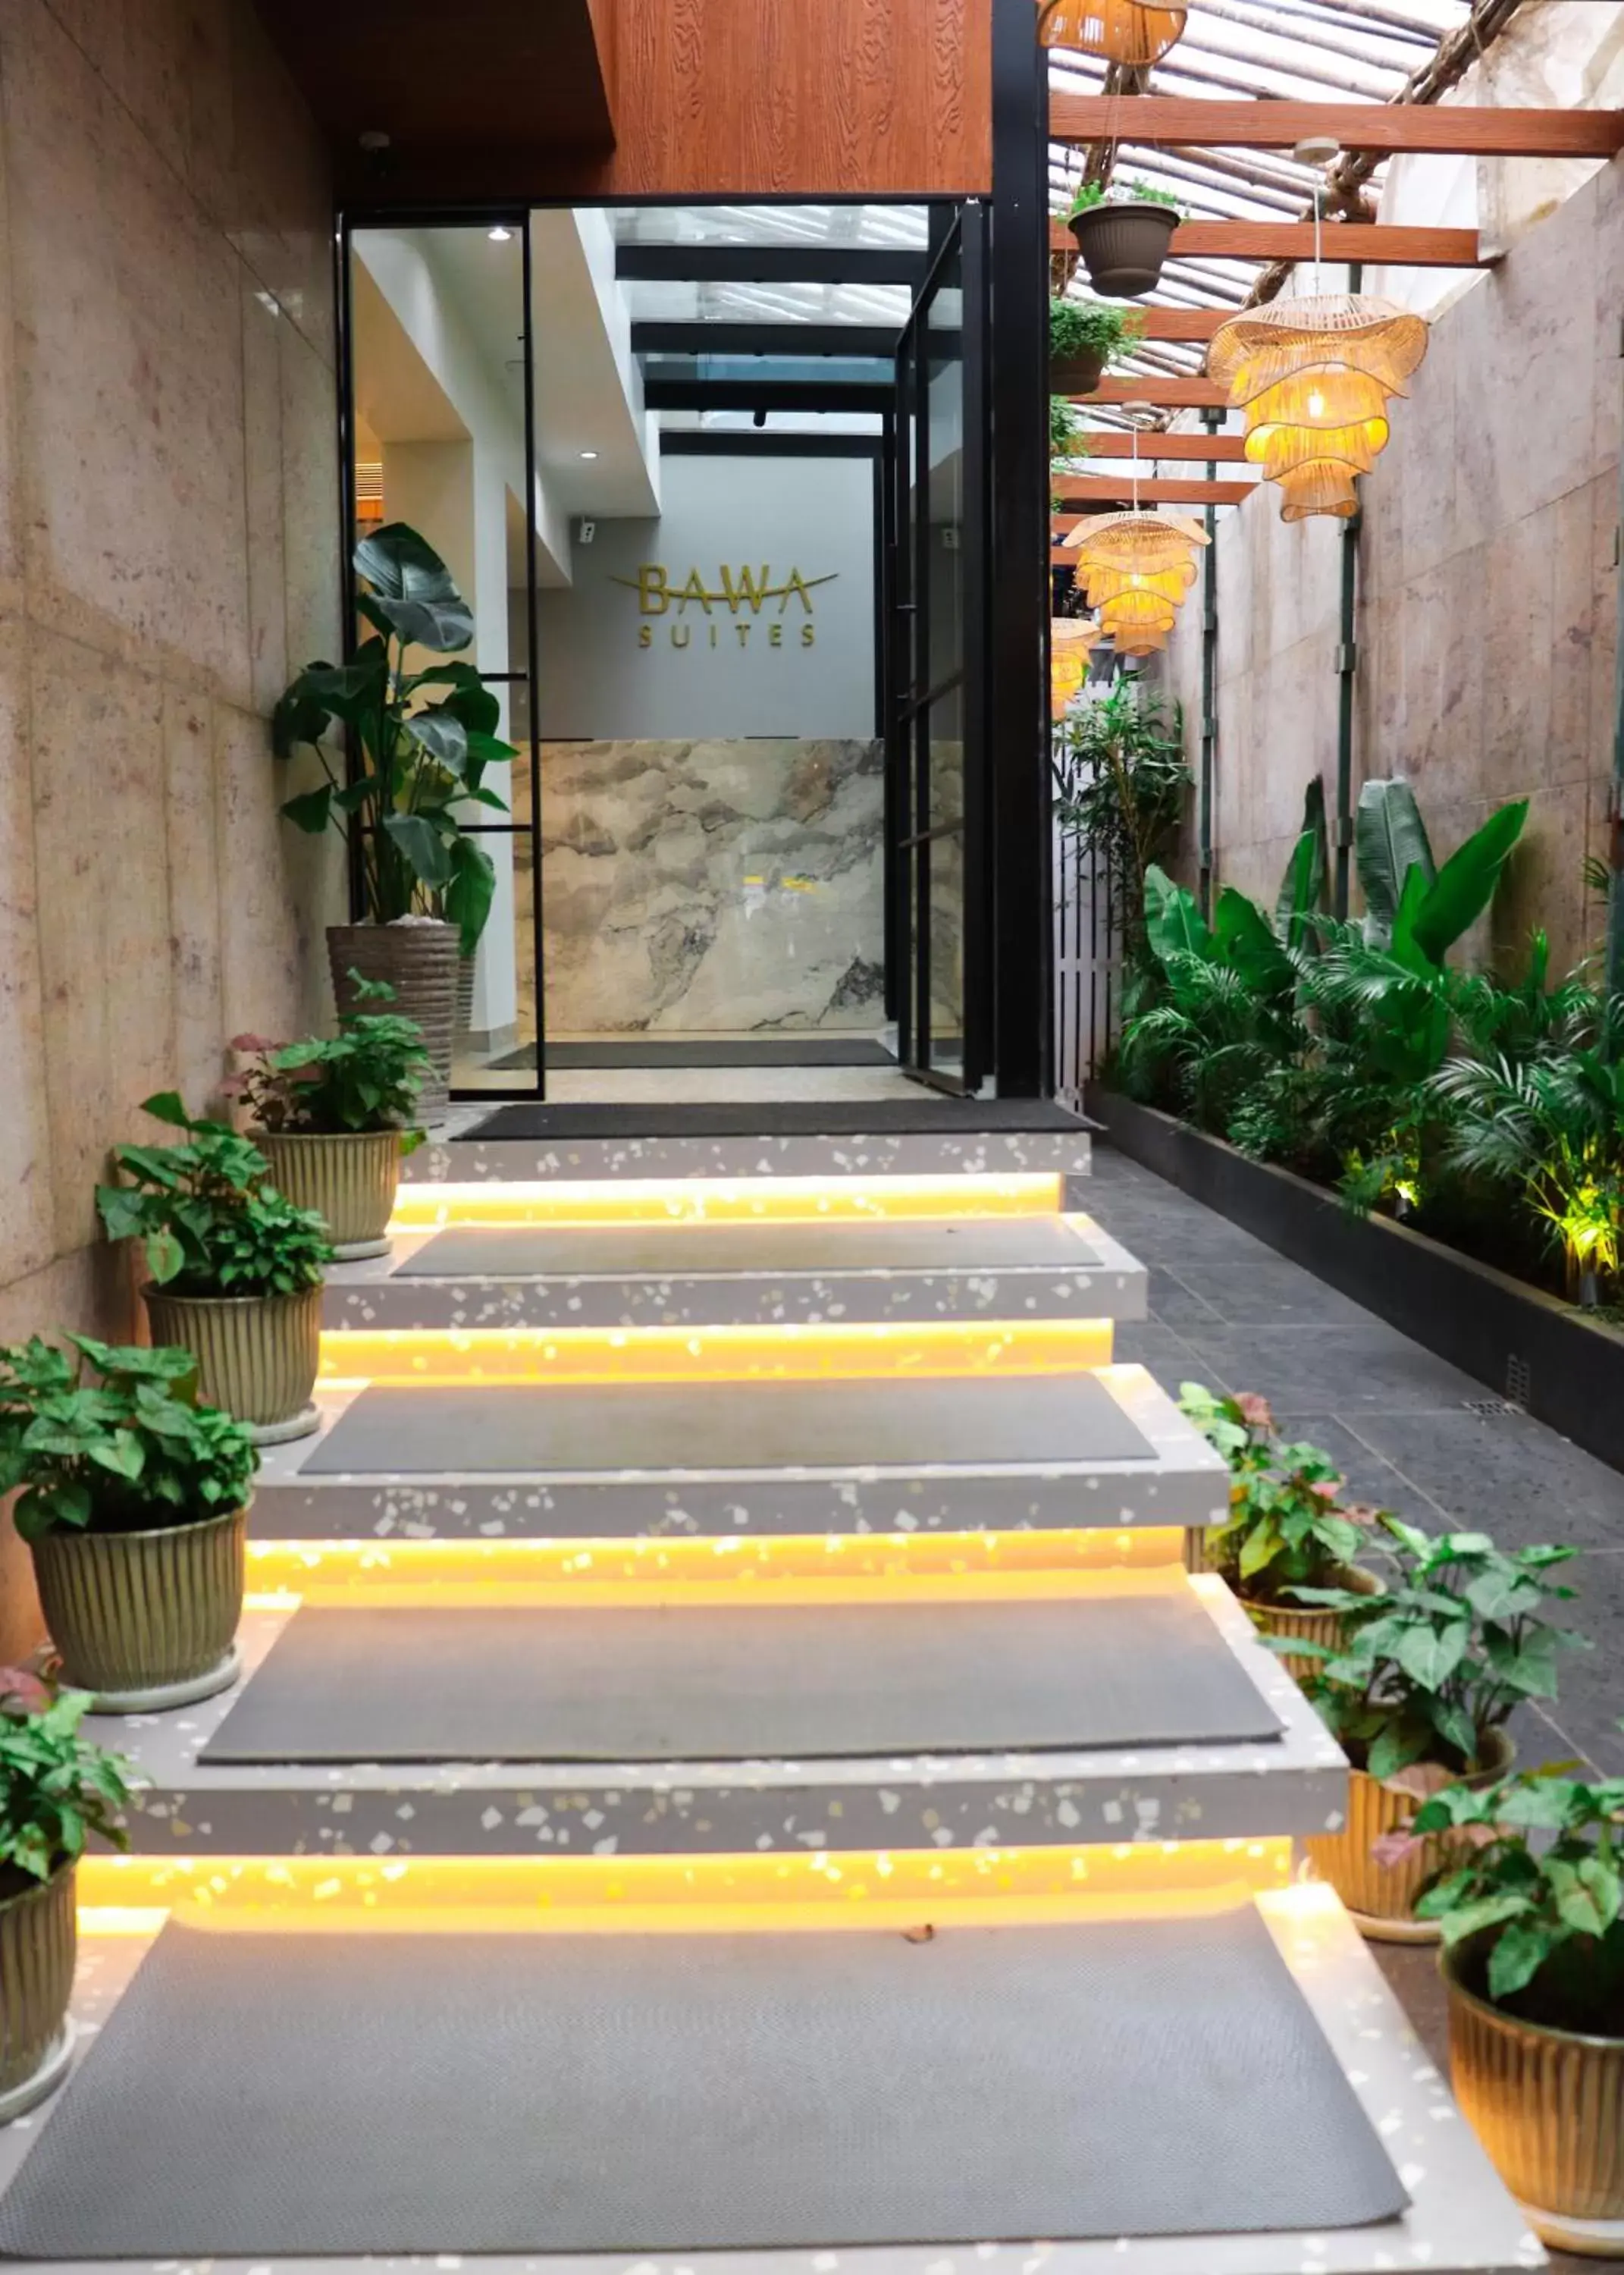 Facade/entrance in Hotel Bawa Suites